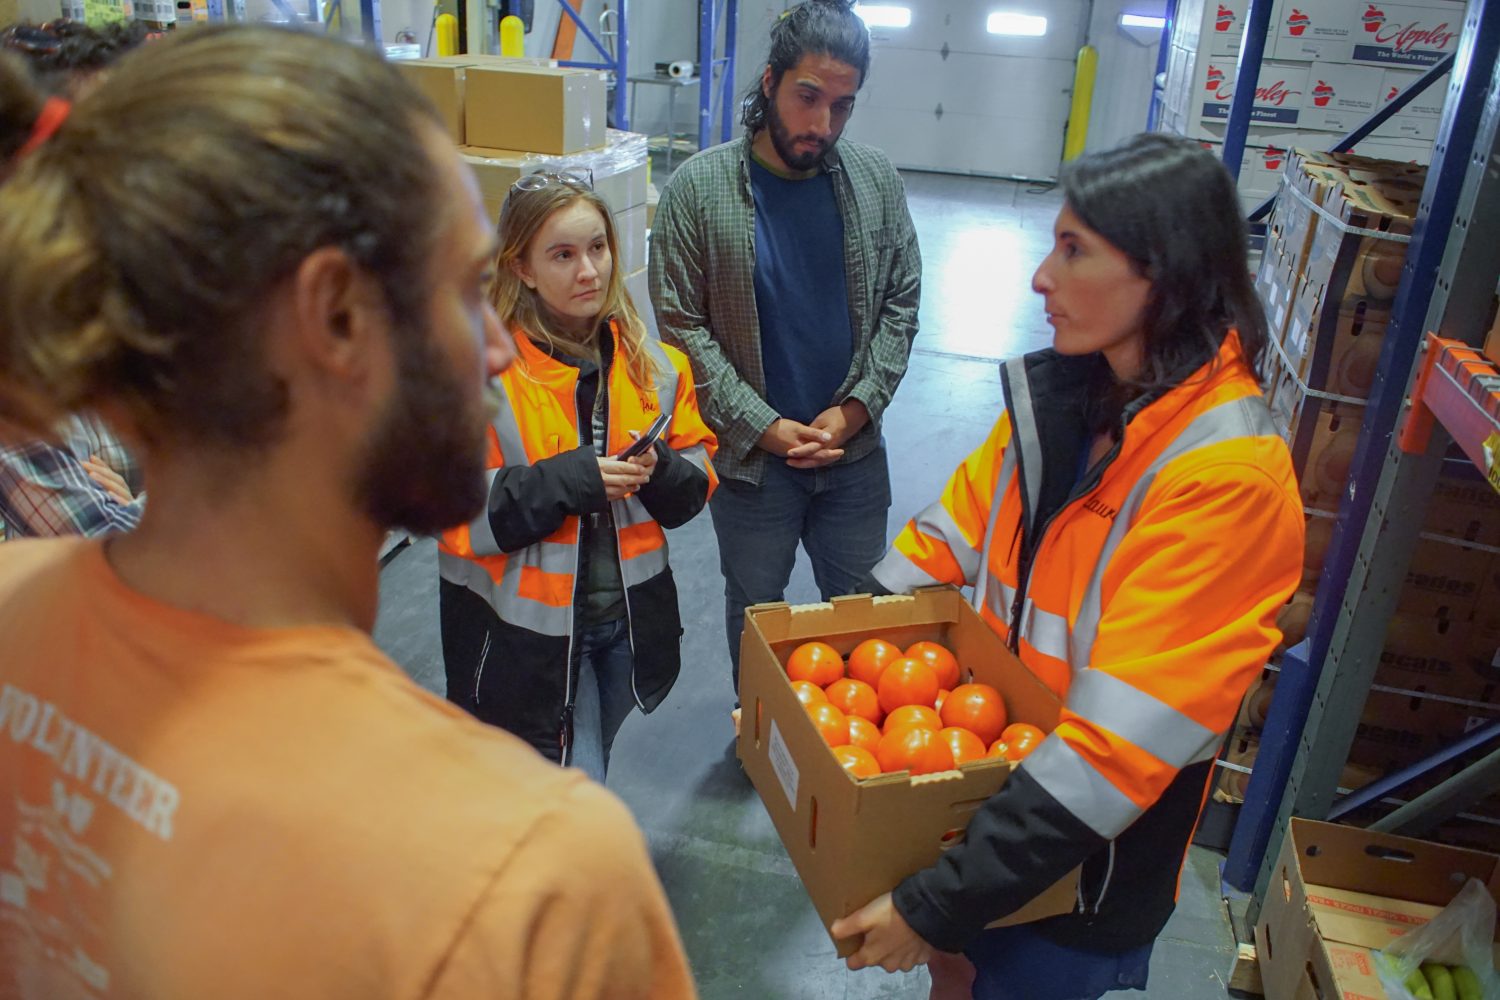 Group of people in an apple packing plant